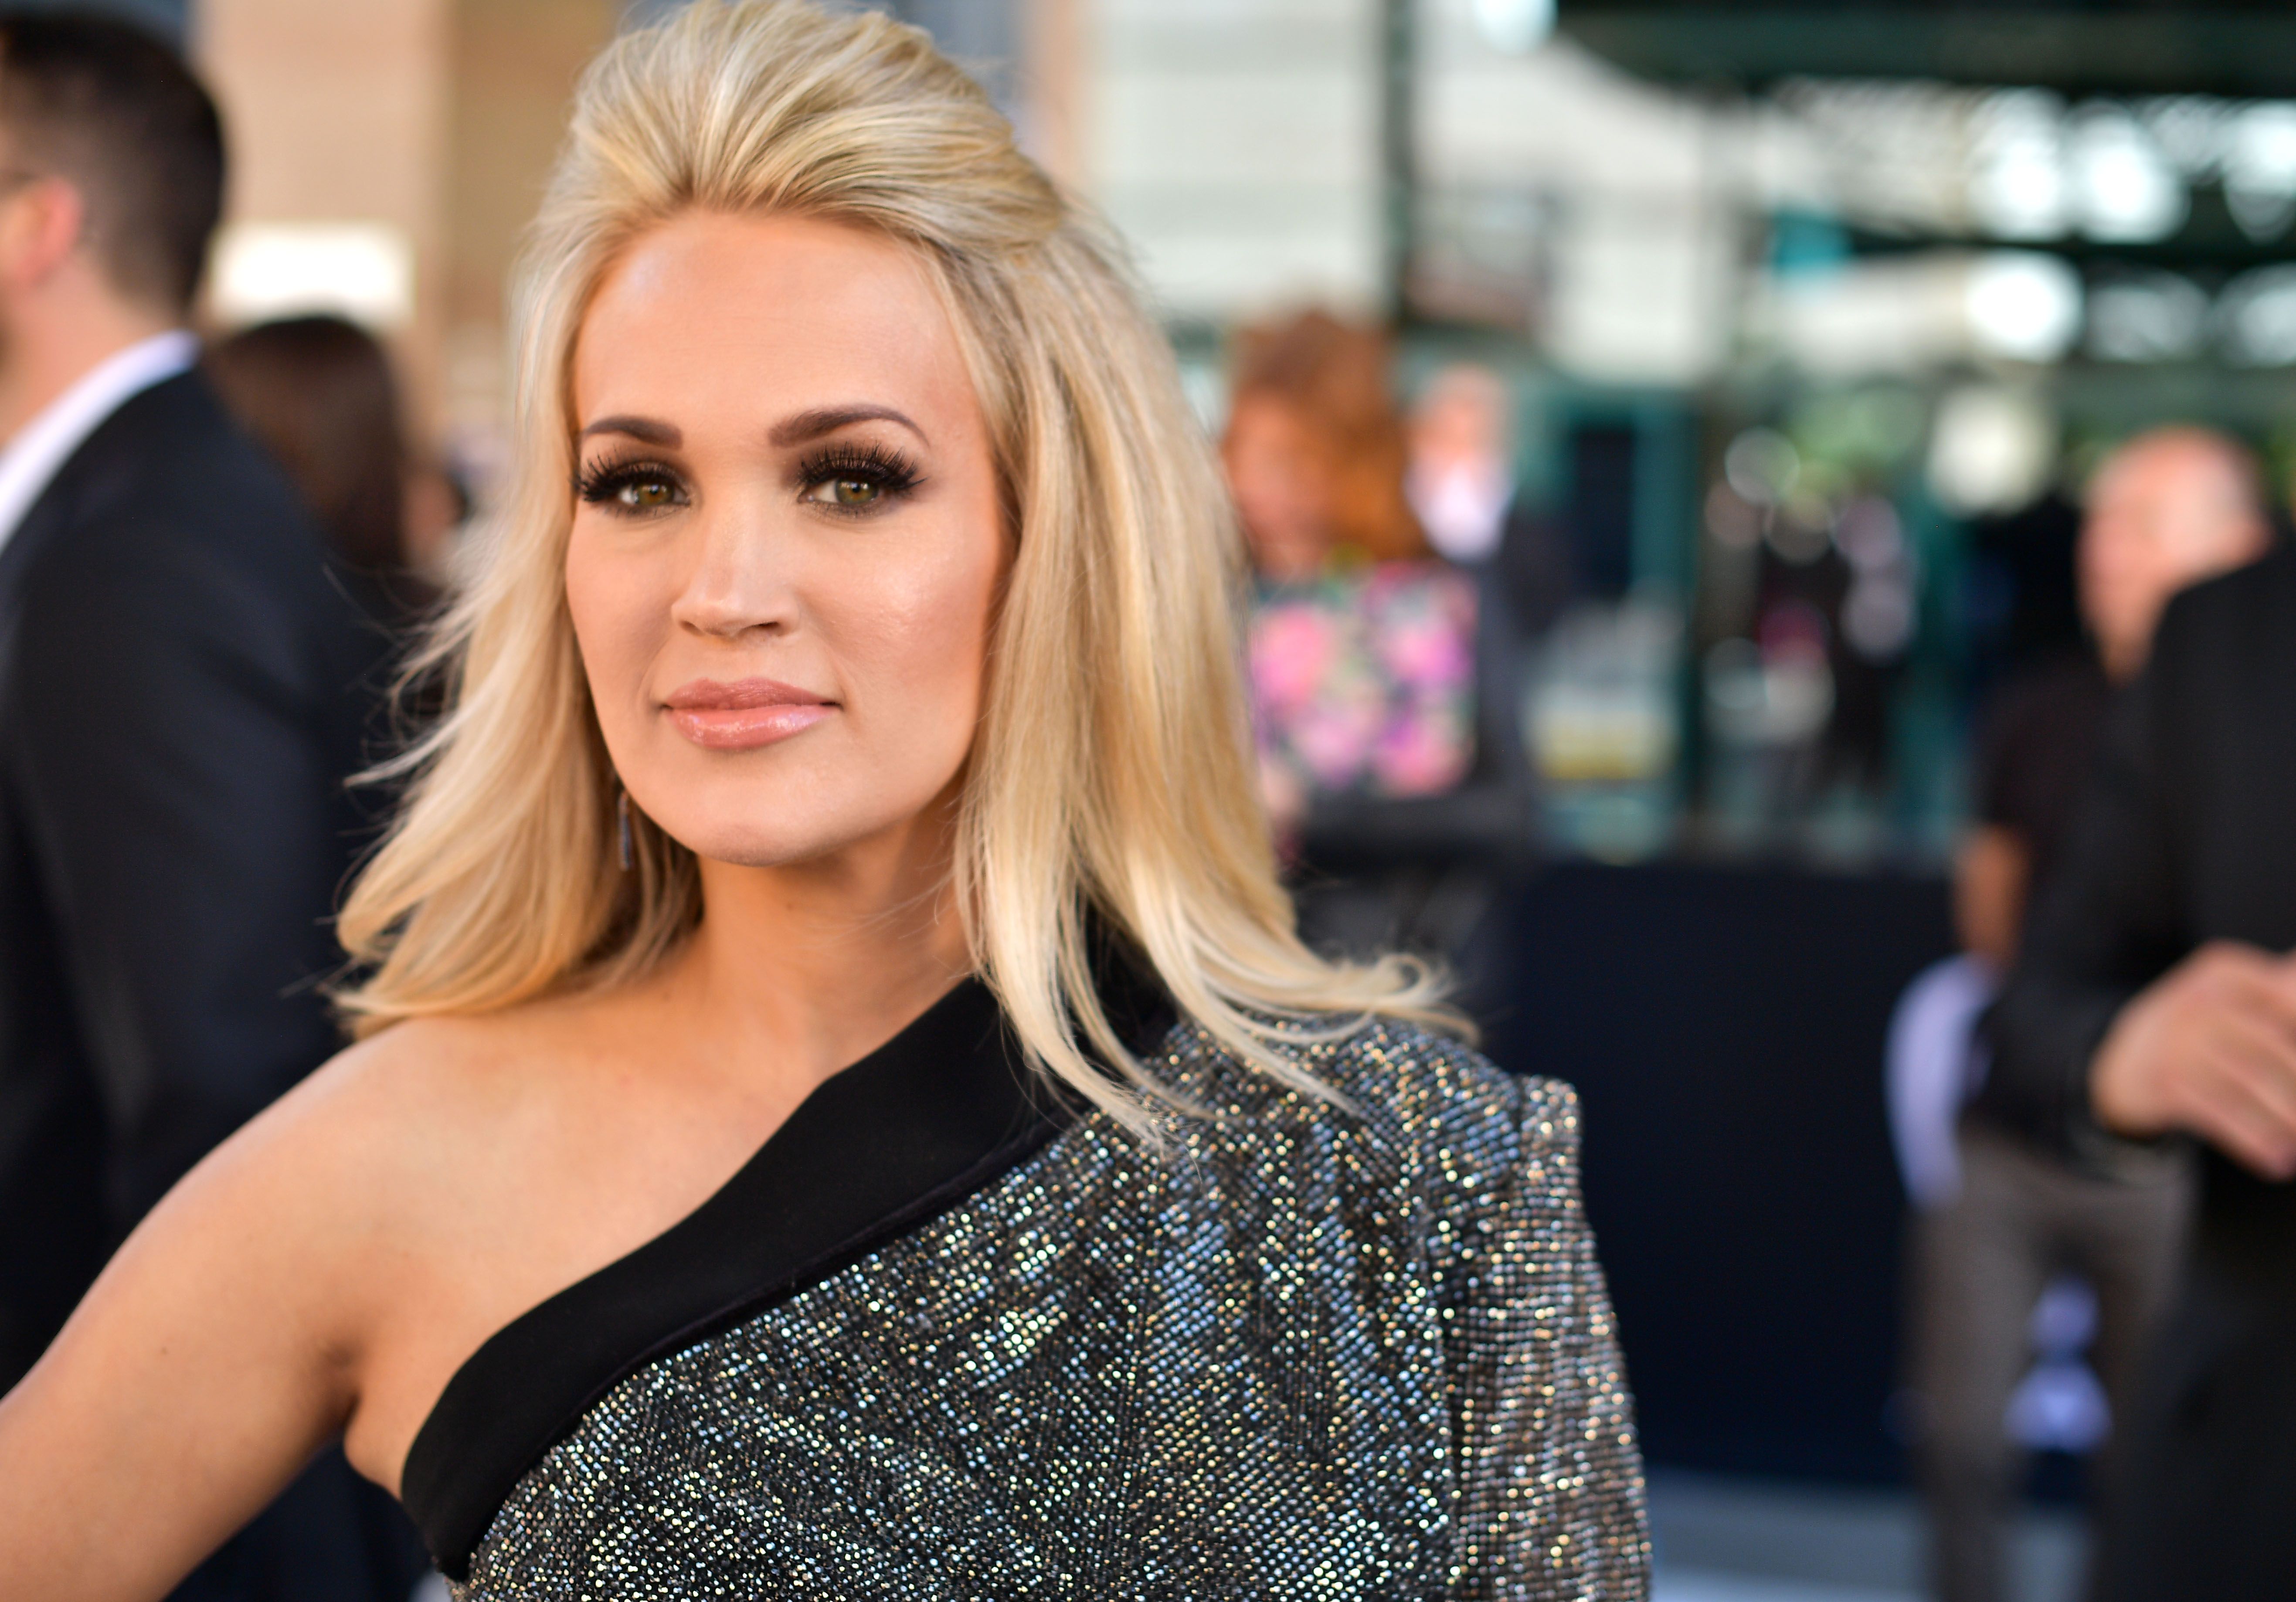 Carrie Underwood at the 54th Academy Of Country Music Awards at MGM Grand Garden Arena on April 07, 2019 | Photo: Getty Images